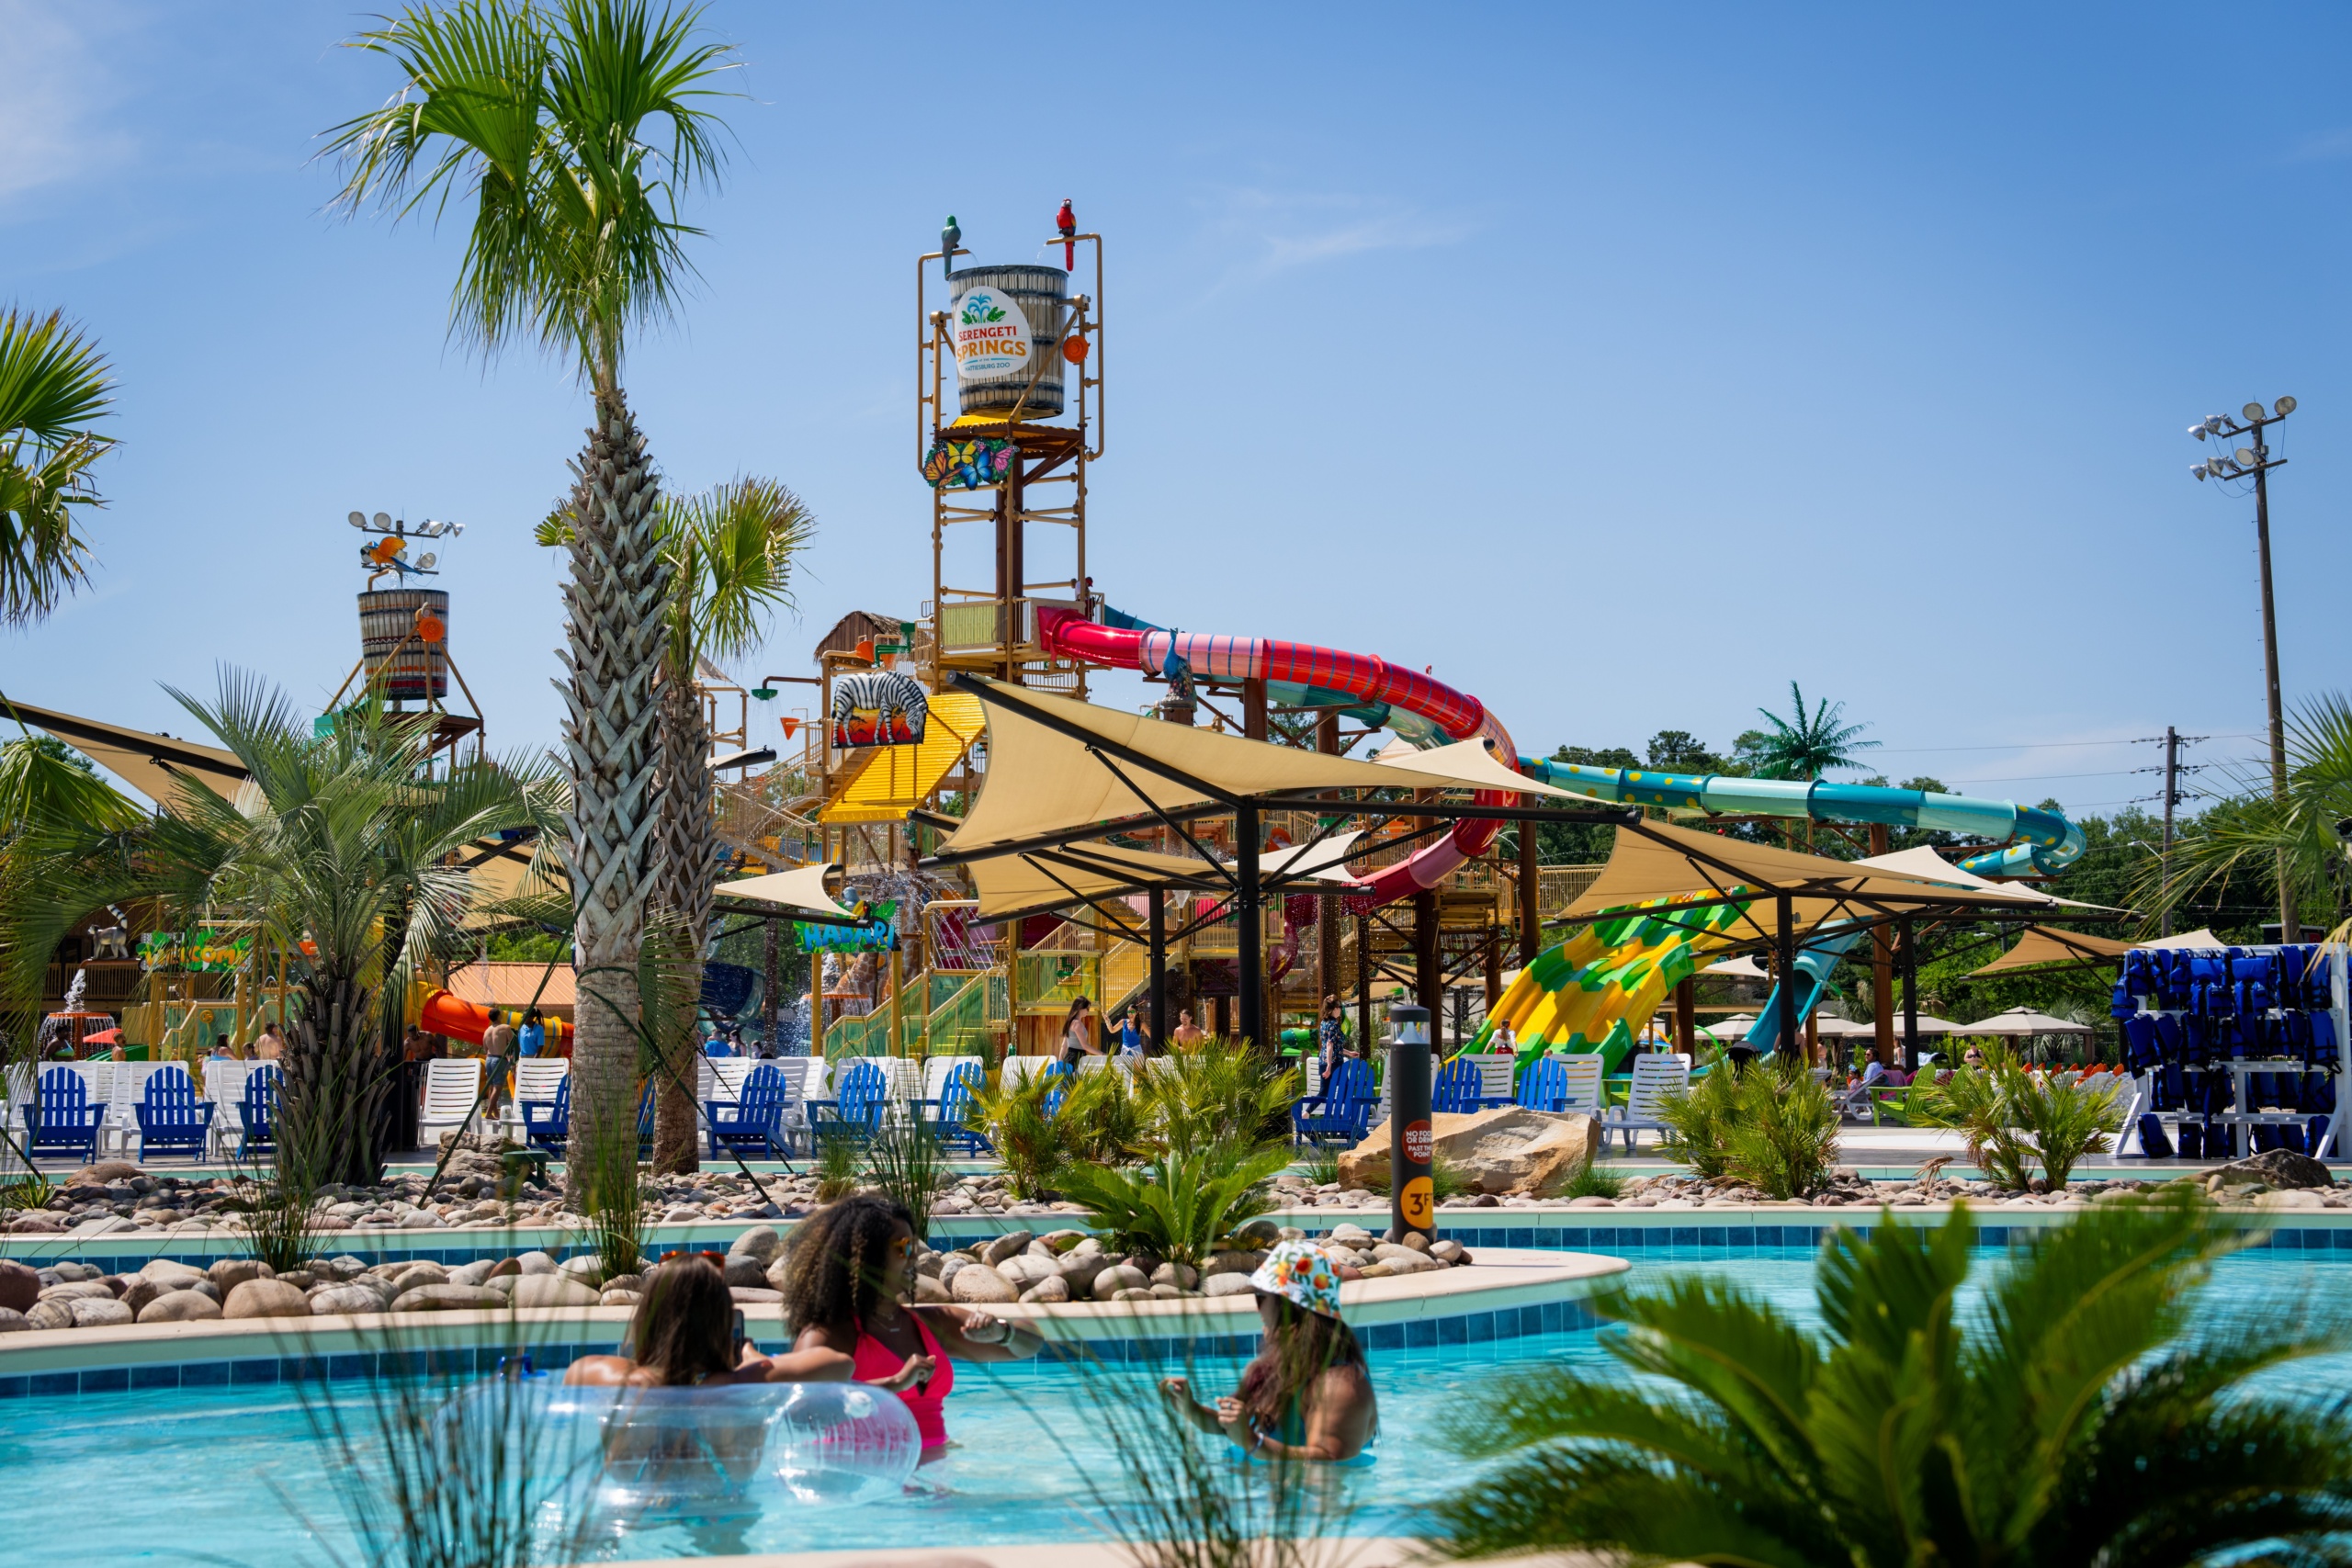 A lazy river at a water park with an aquatic play structure in the background